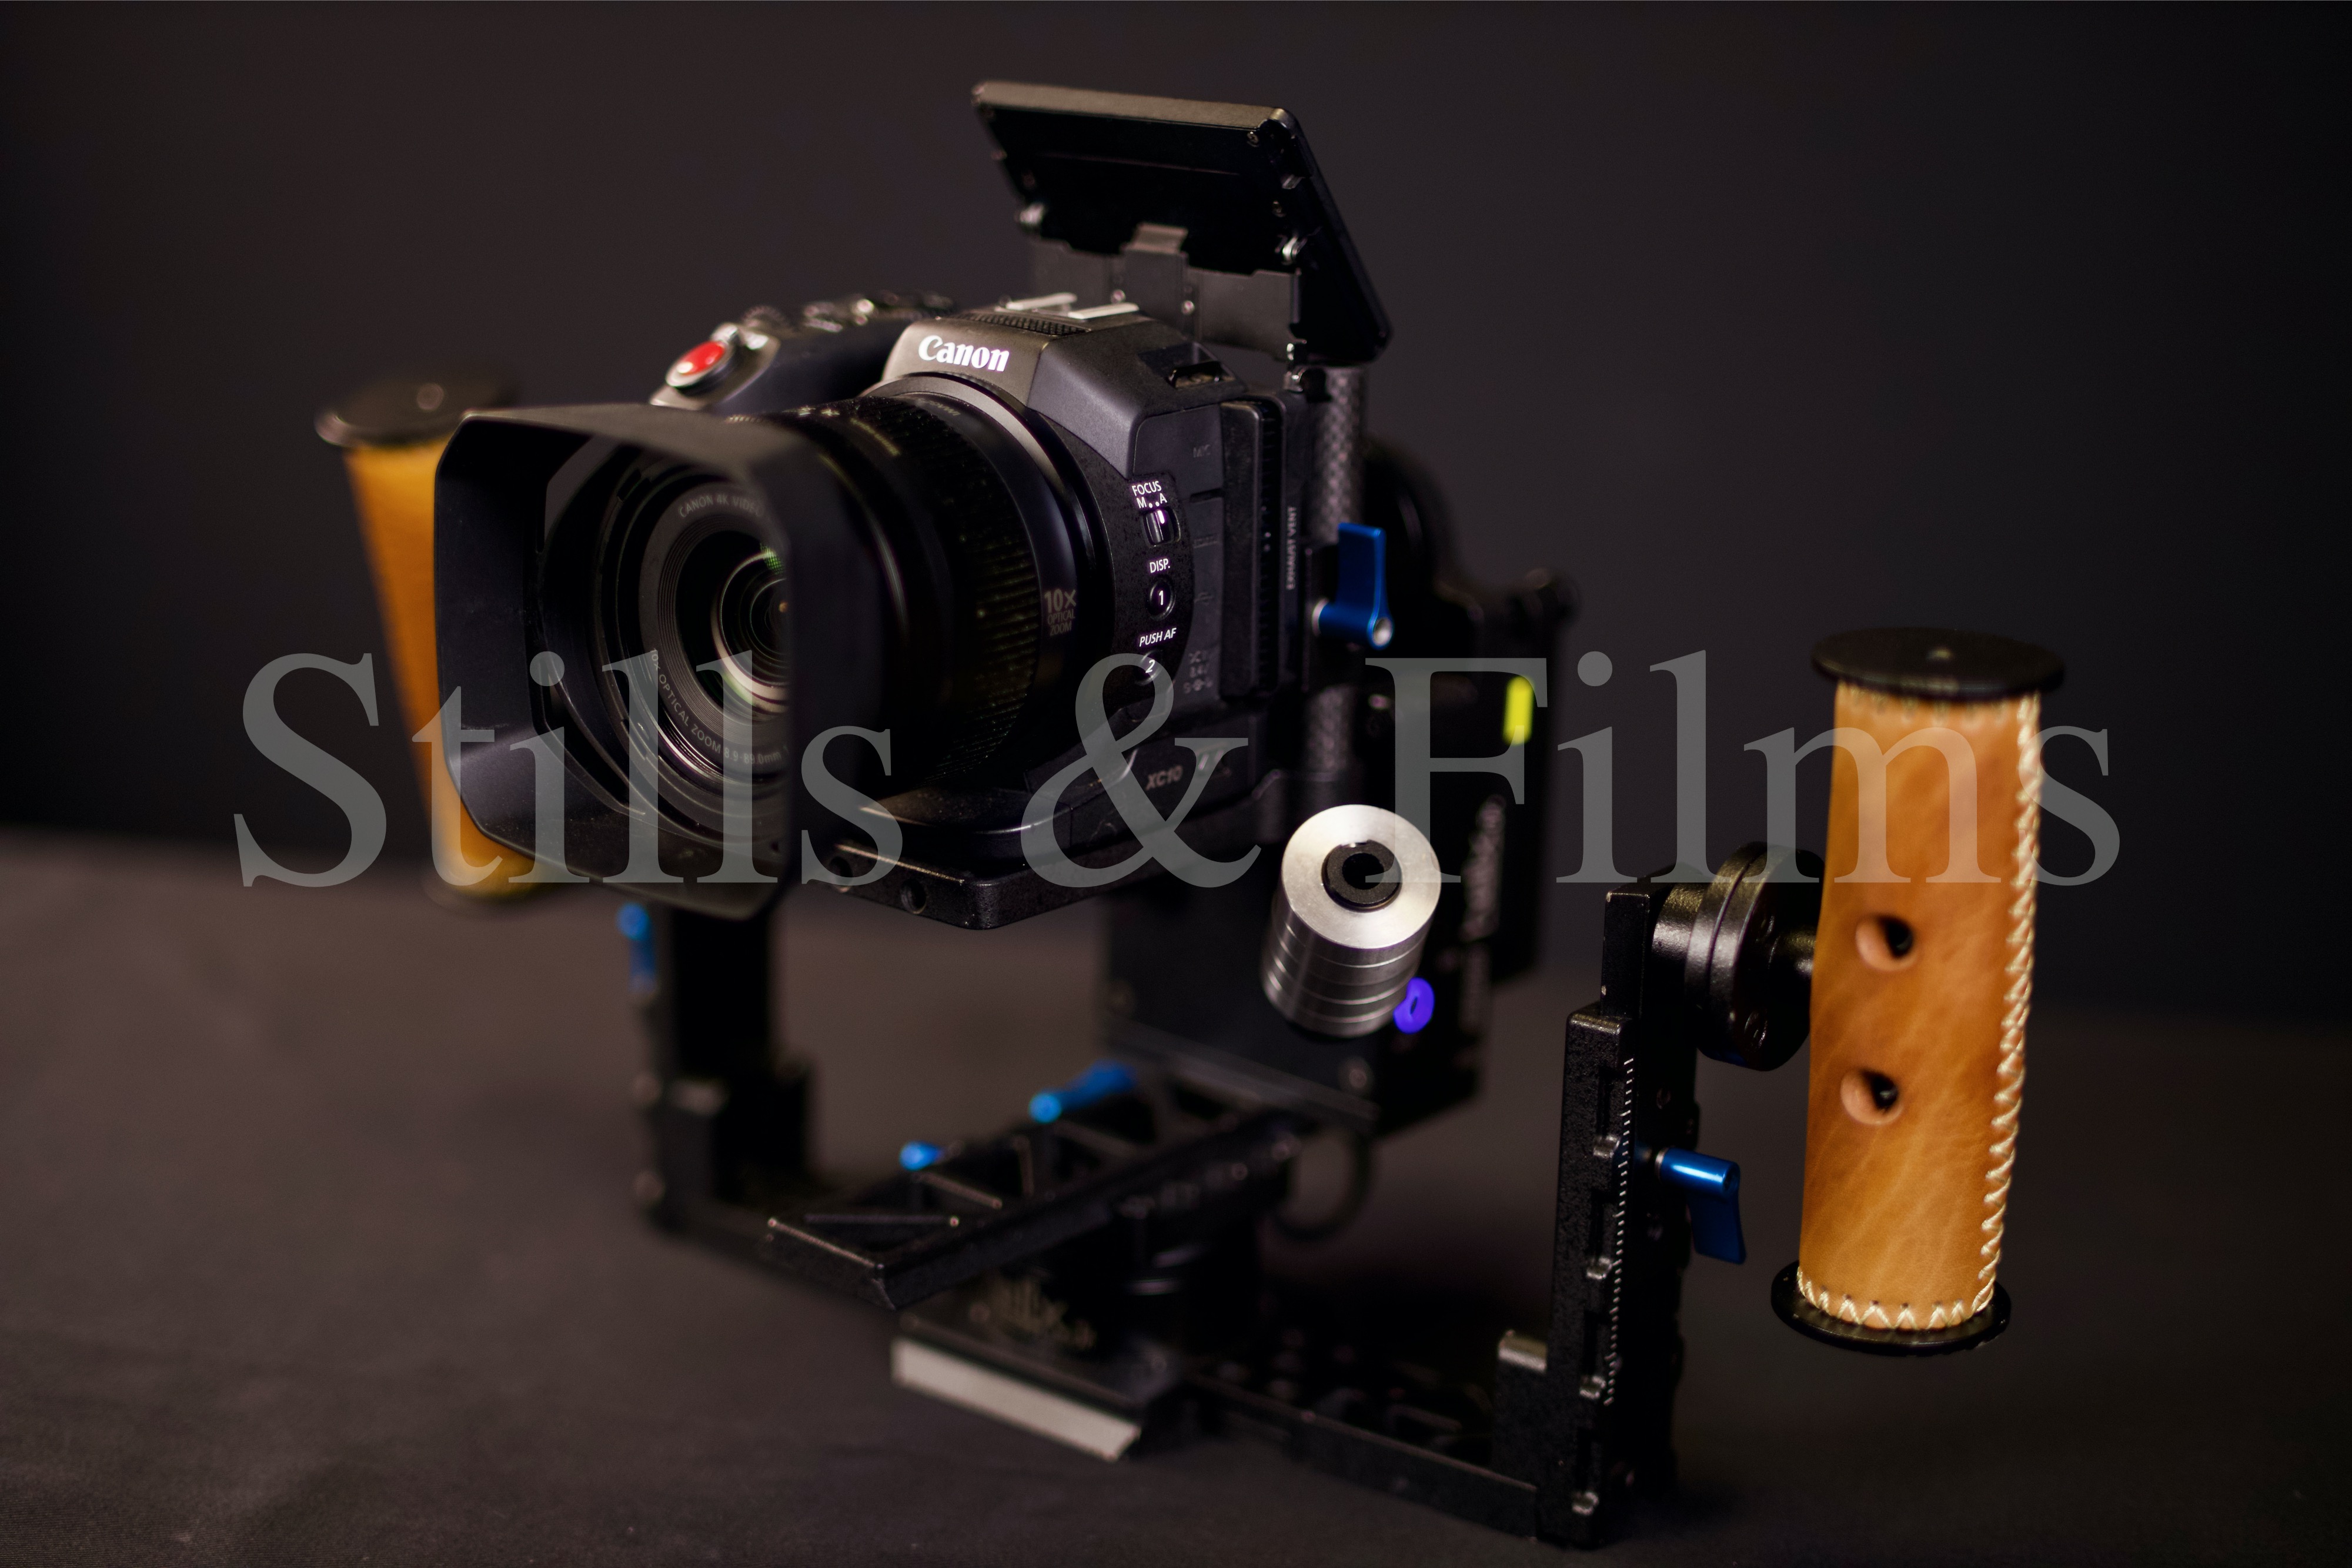 Letus Helix Jr magnesium gimbal with Canon XC10